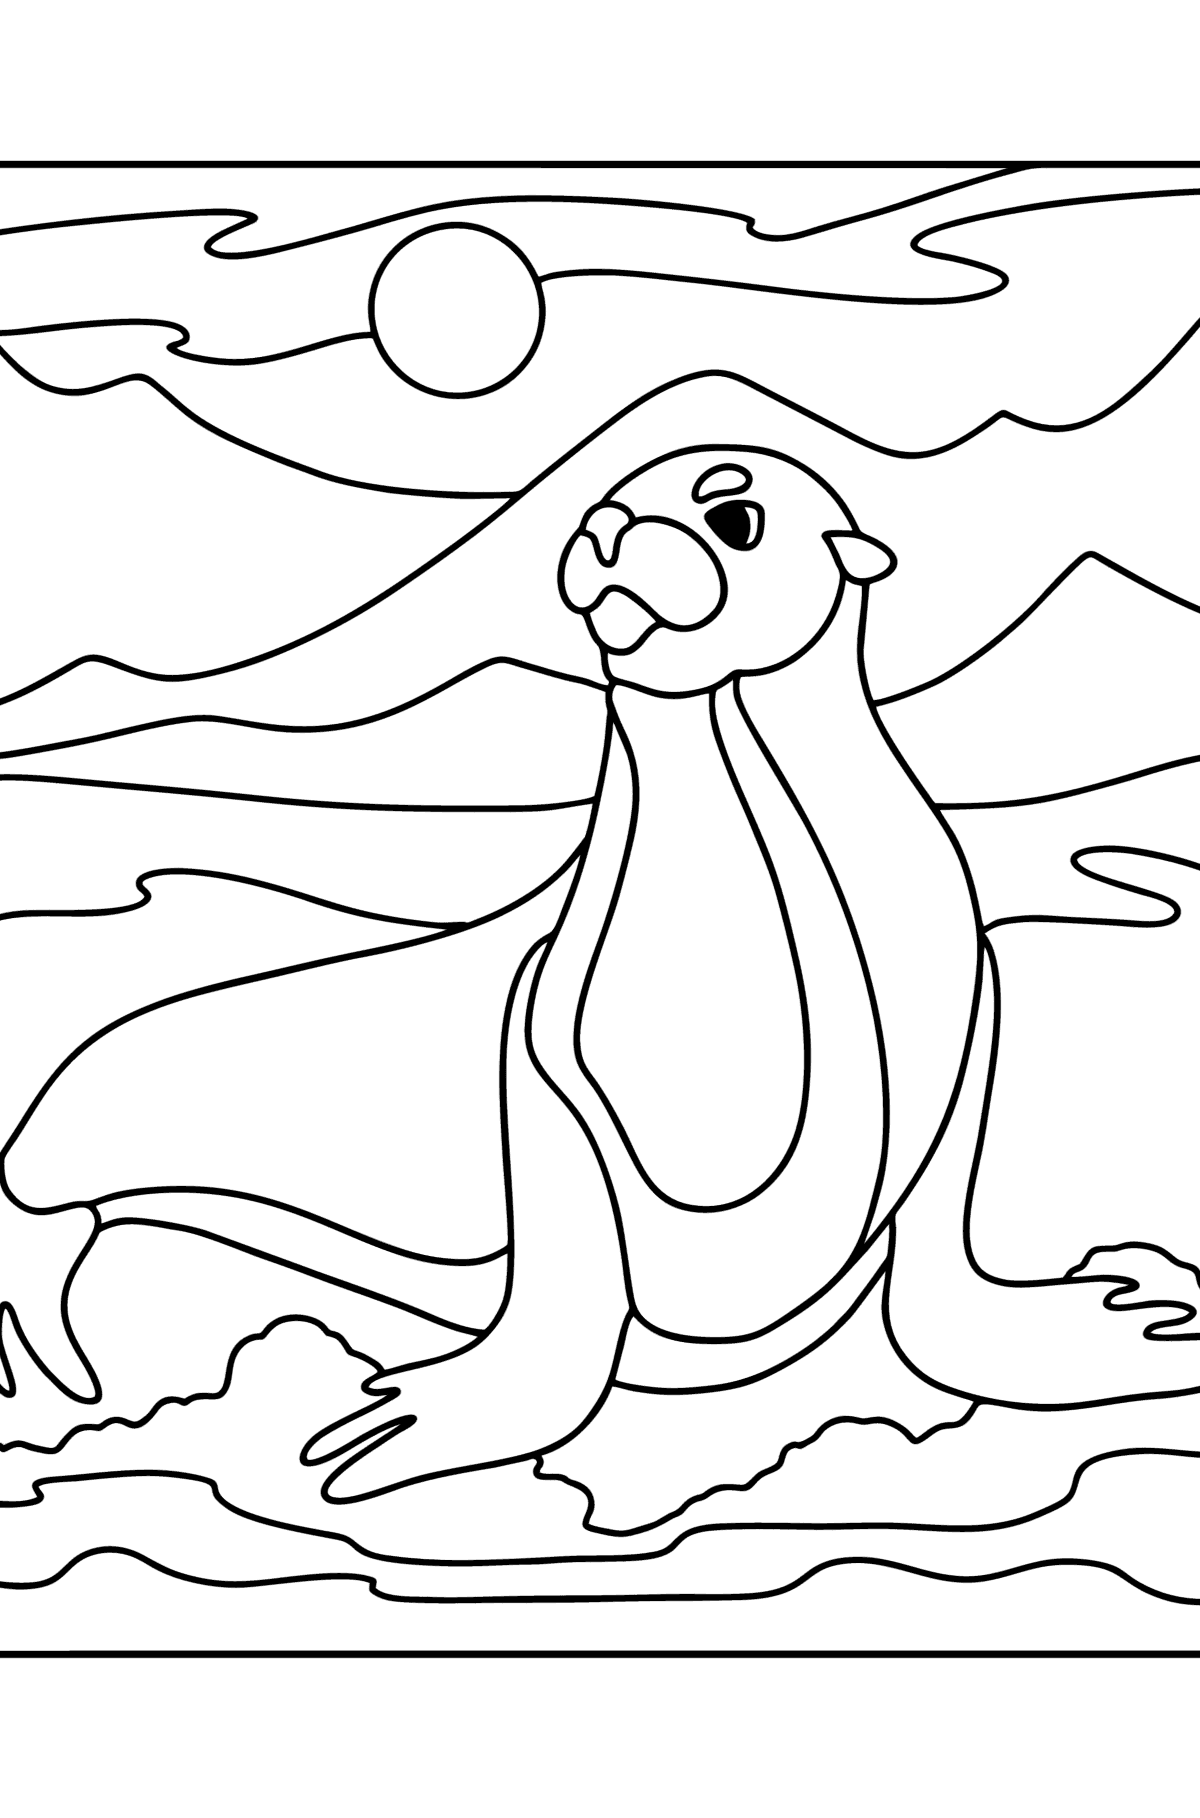 Sea lion coloring page - Coloring Pages for Kids